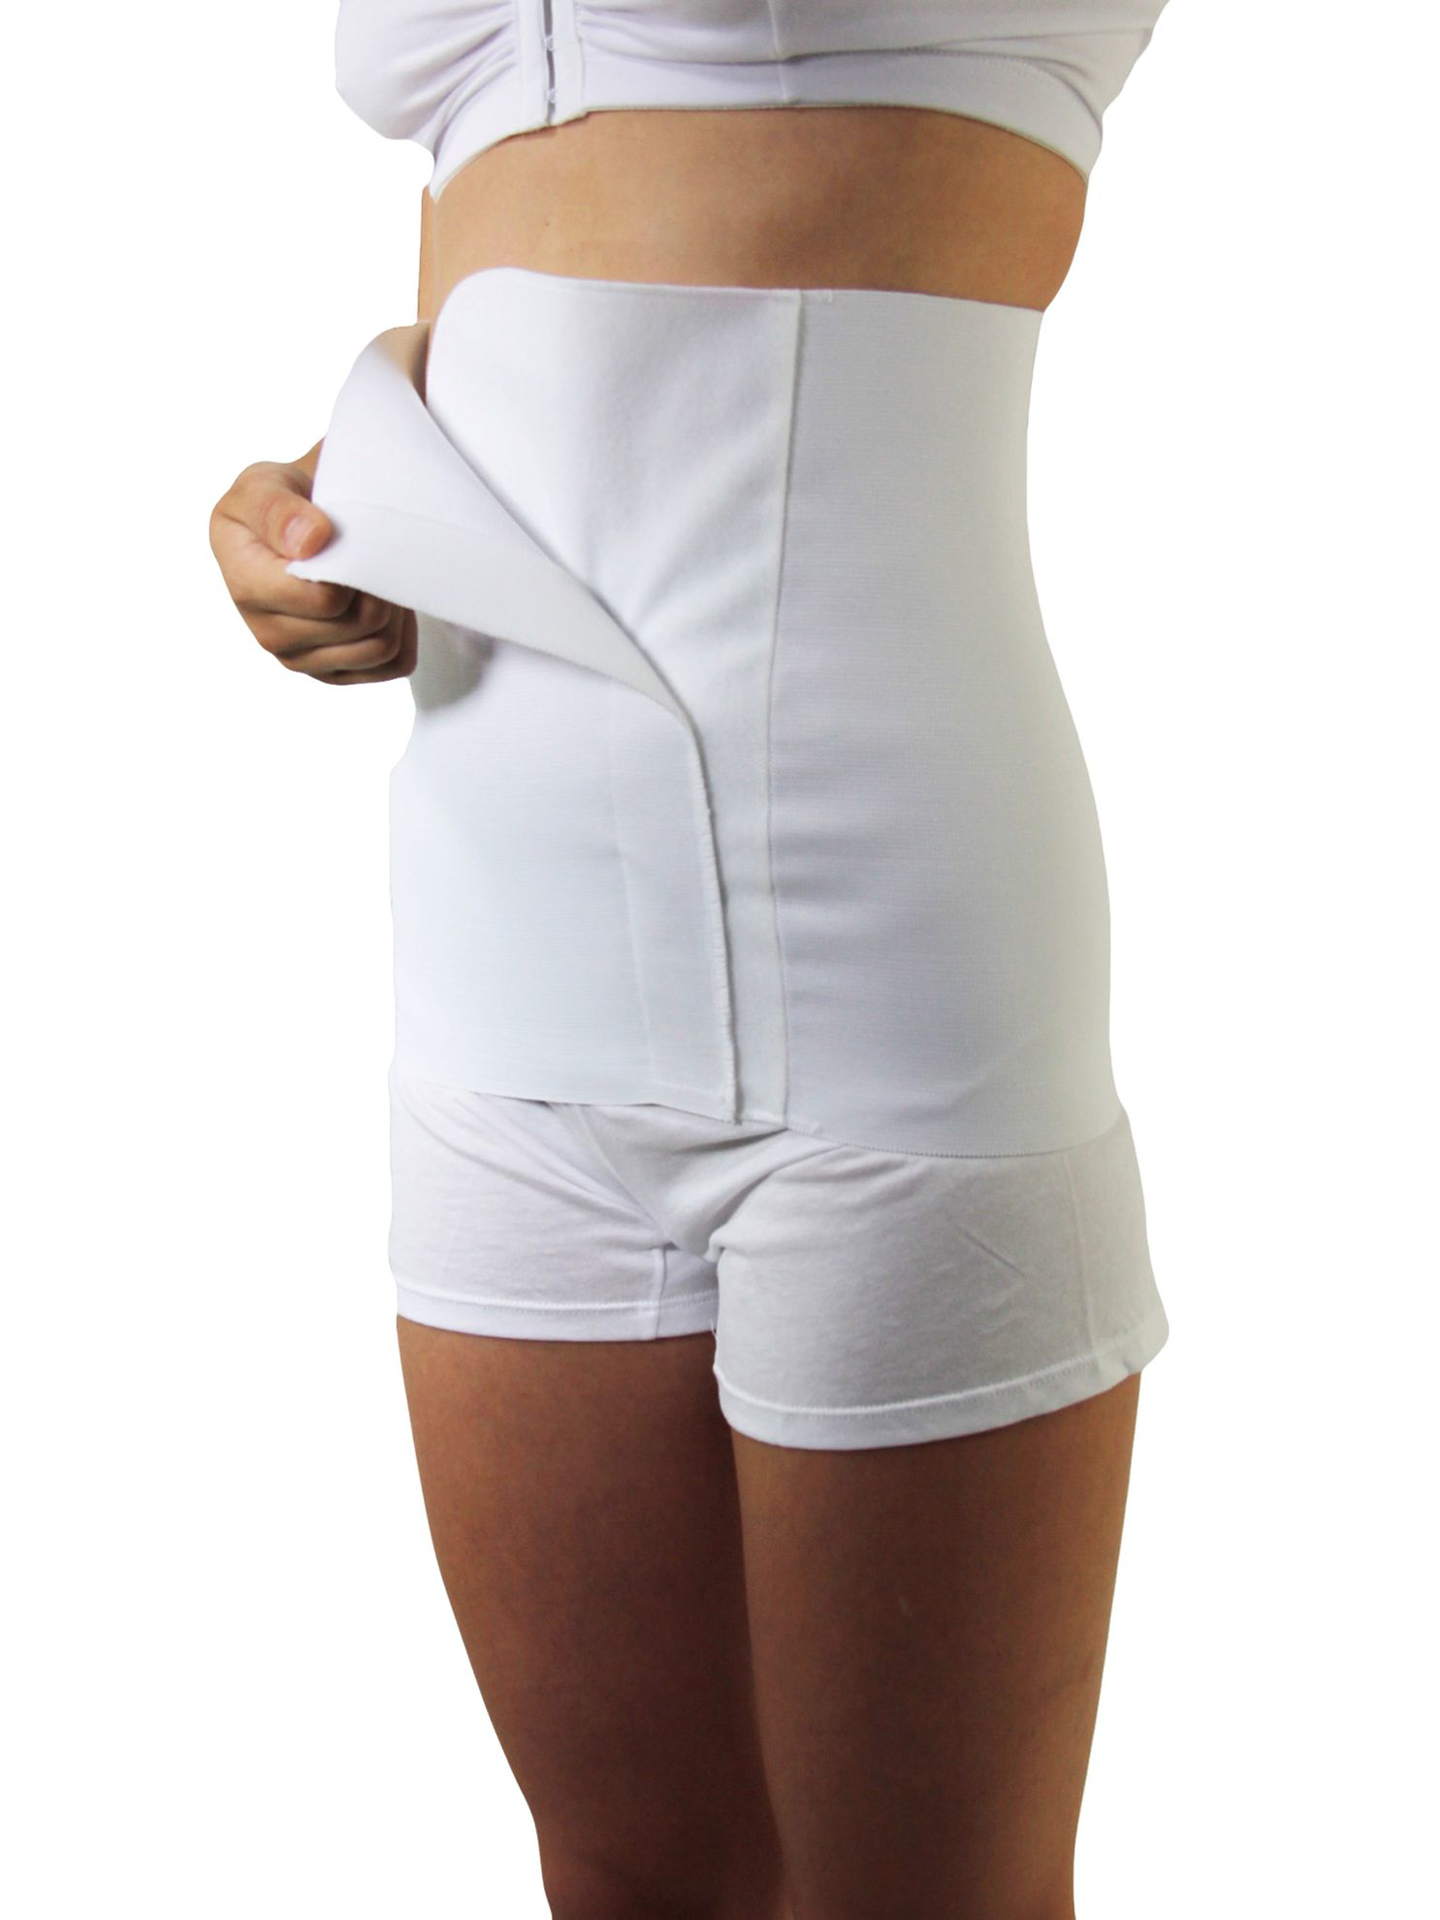 Post Delivery Abdominal Binder 12-inch with Velcro Closure. Men Compression  Shirts, Girdles, Chest Binders, Hernia Garments